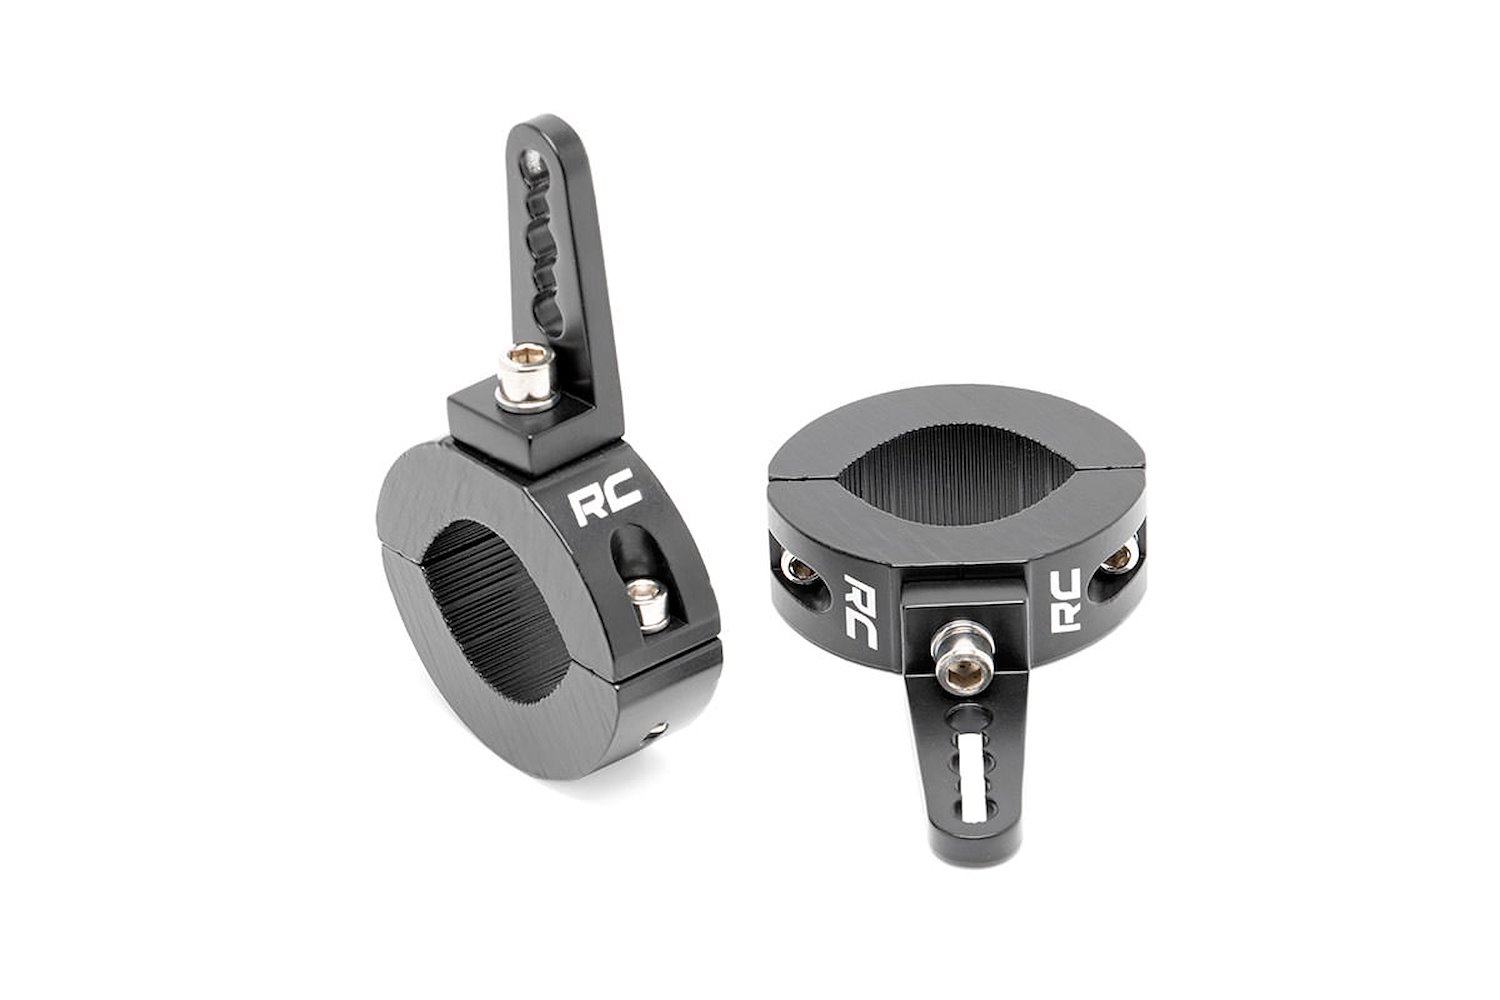 70171 Universal LED Light Adjustable 1.65-2-inch OD Tube Mounting Clamps (Pair)